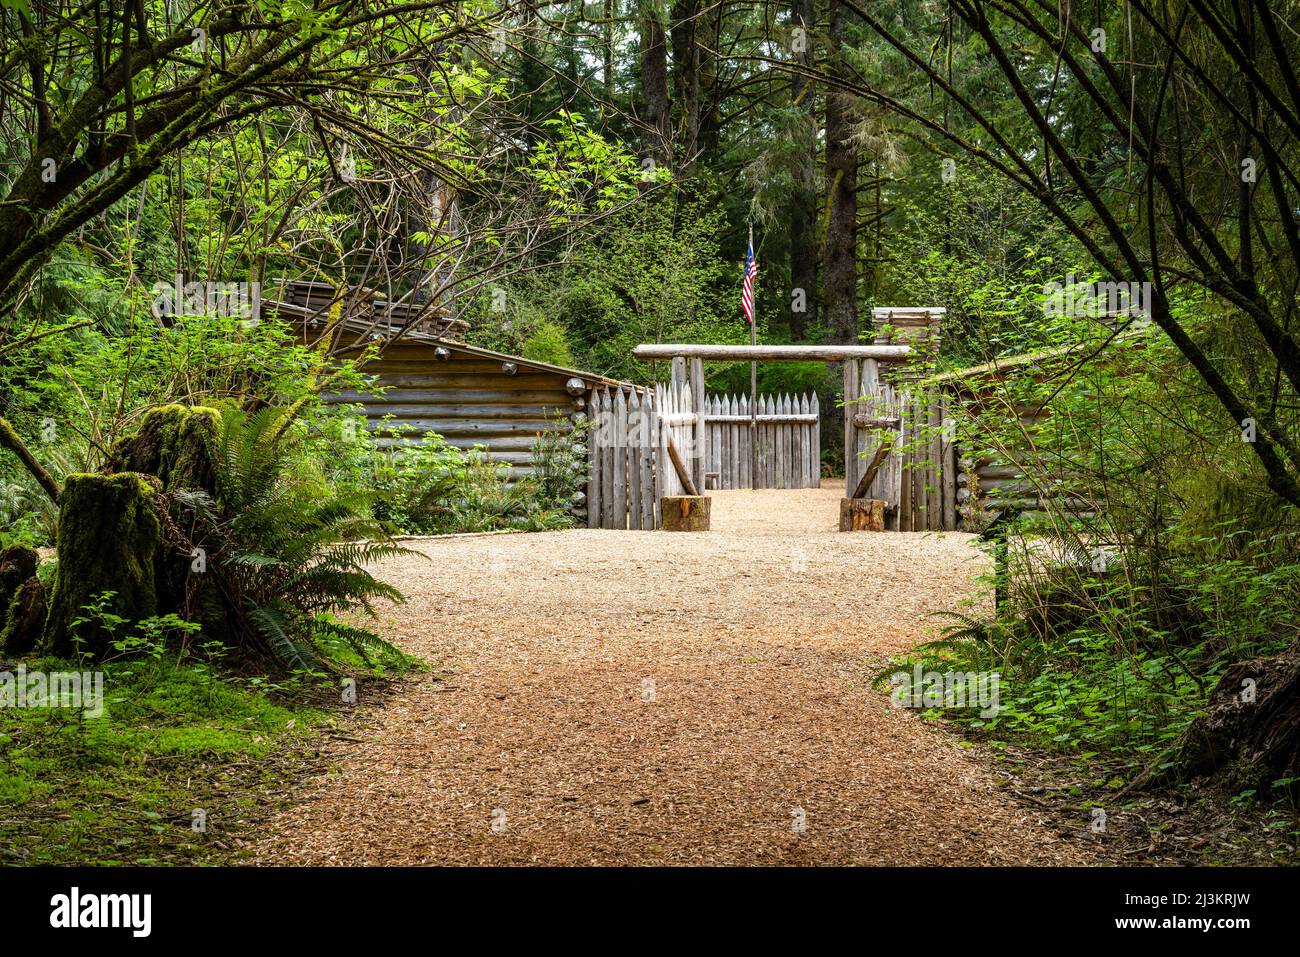 Winter Quarters in Fort Clatsop, attracting visitors who have an interest in American history, Lewis and Clark National Historical Park Stock Photo